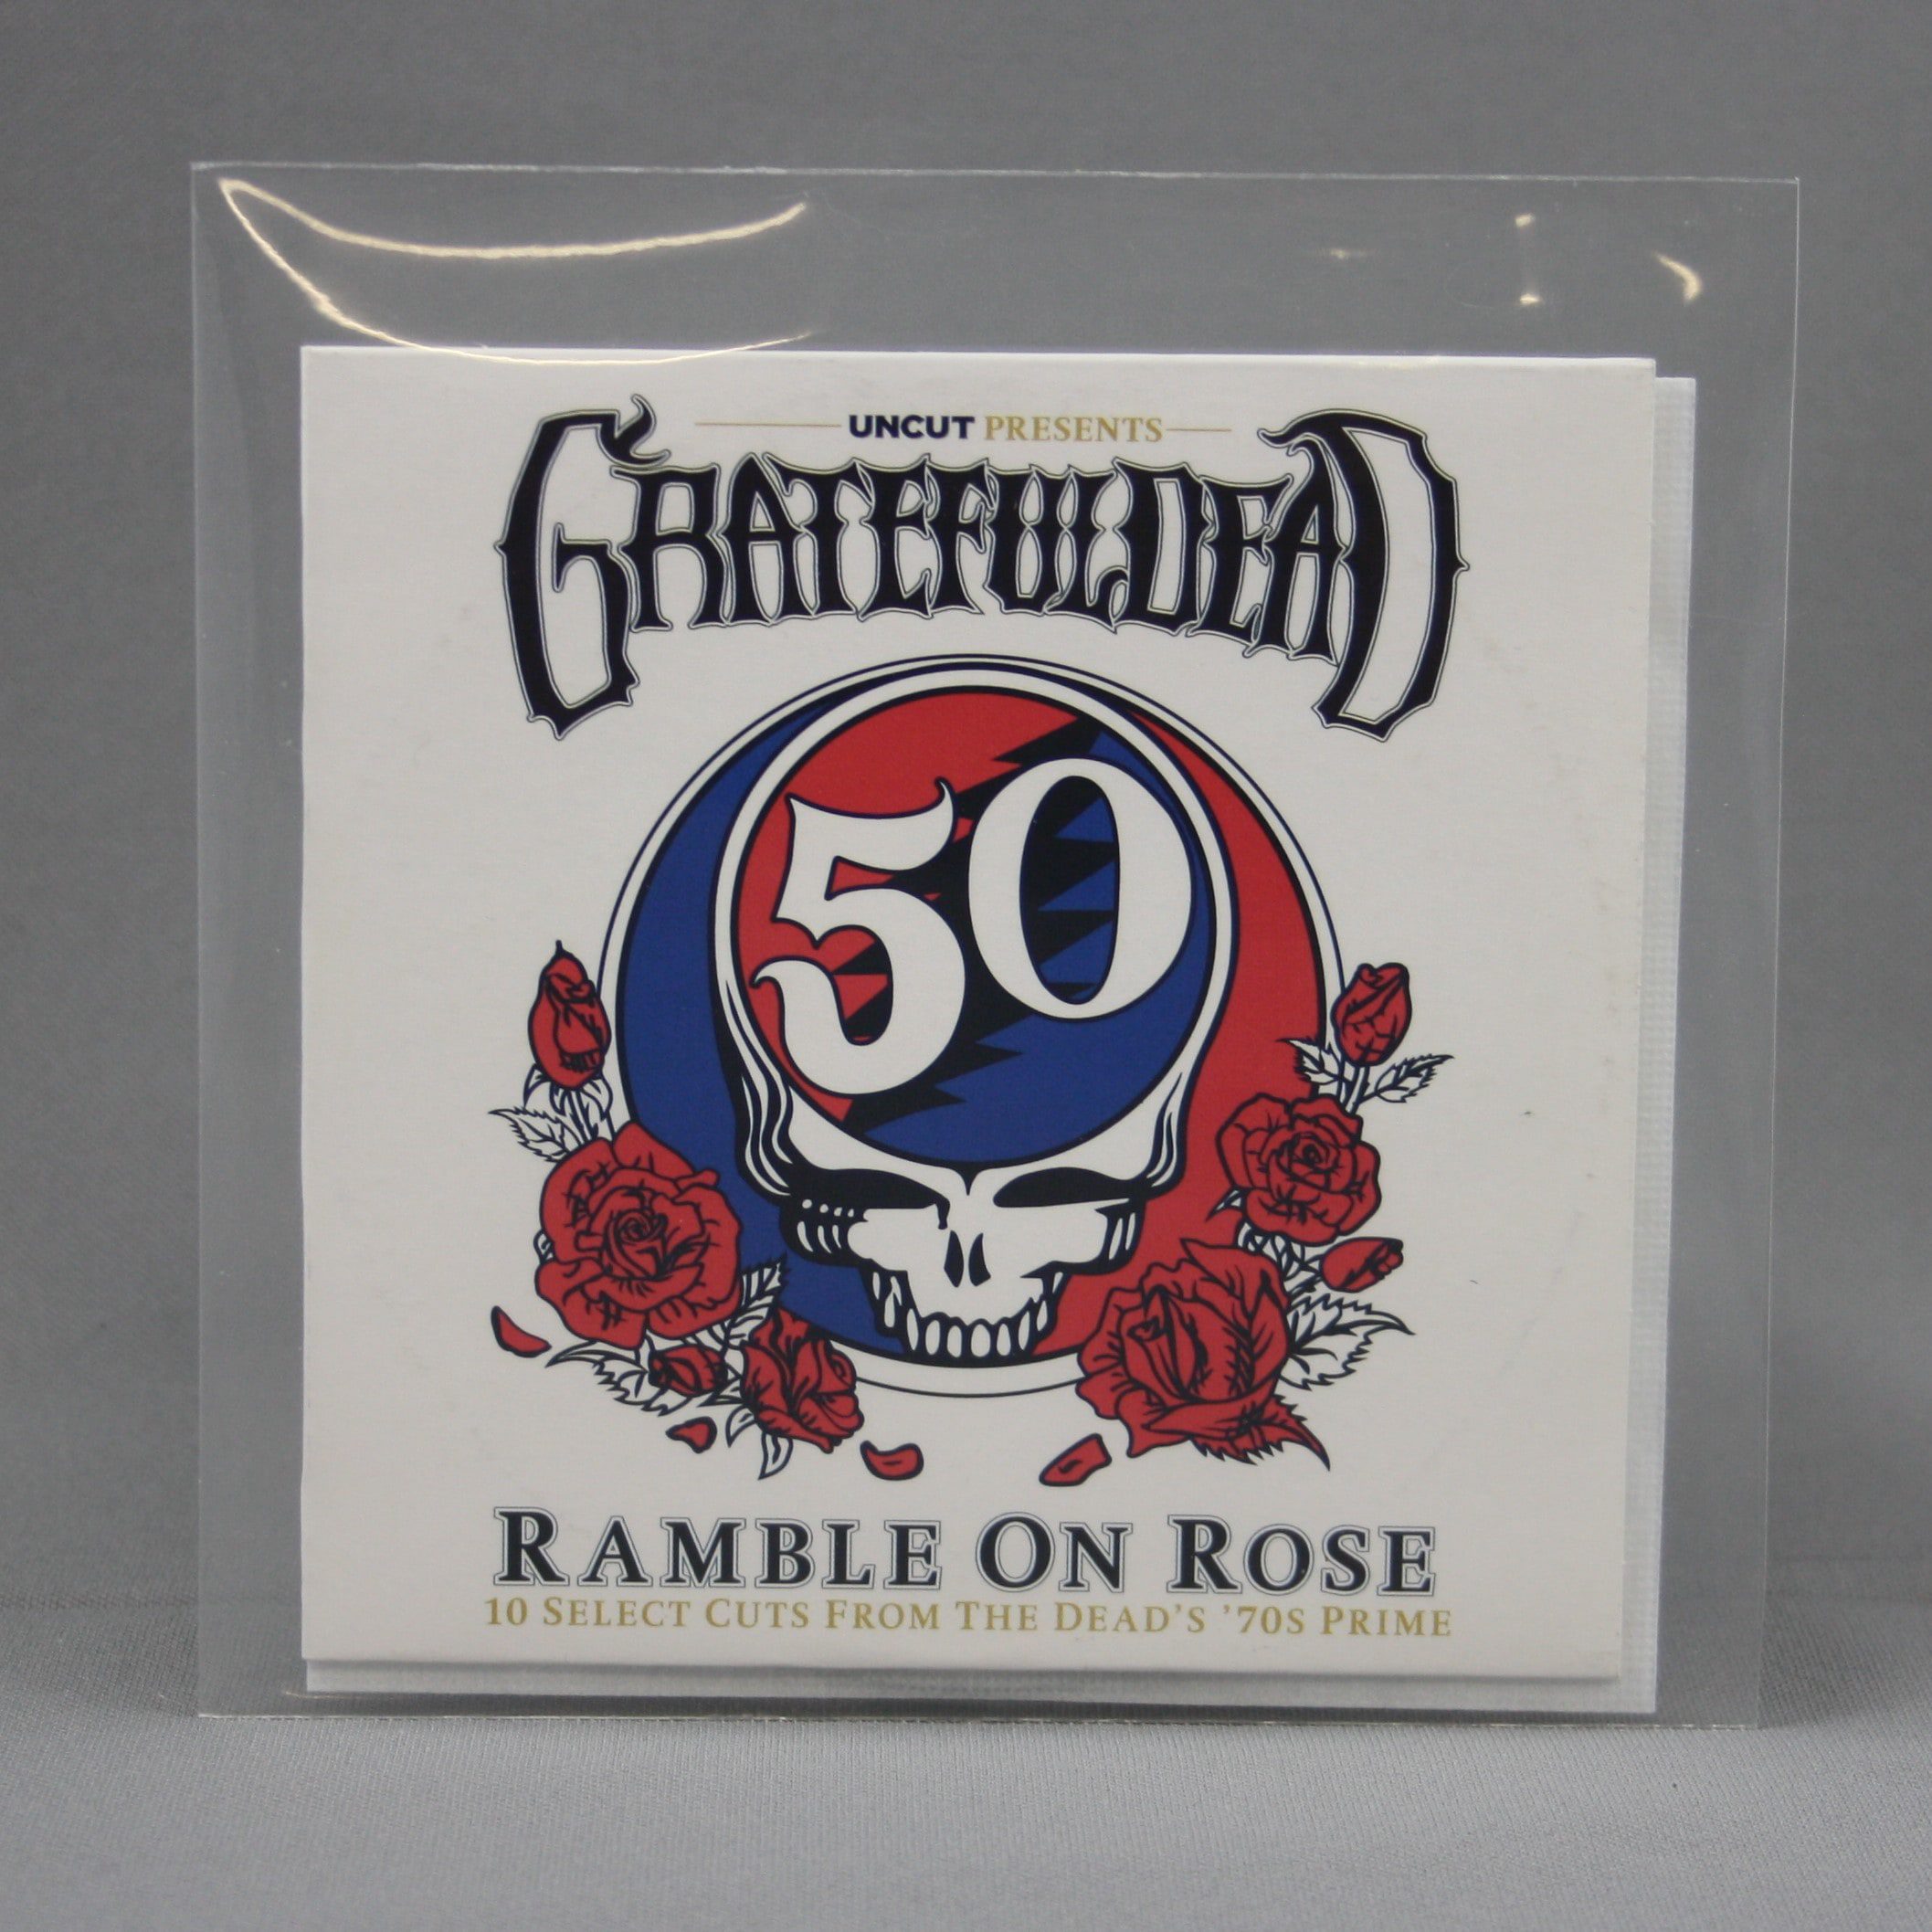 Grateful Dead - Ramble on Rose (10 Select Cuts From the Dead's 70s Prime)